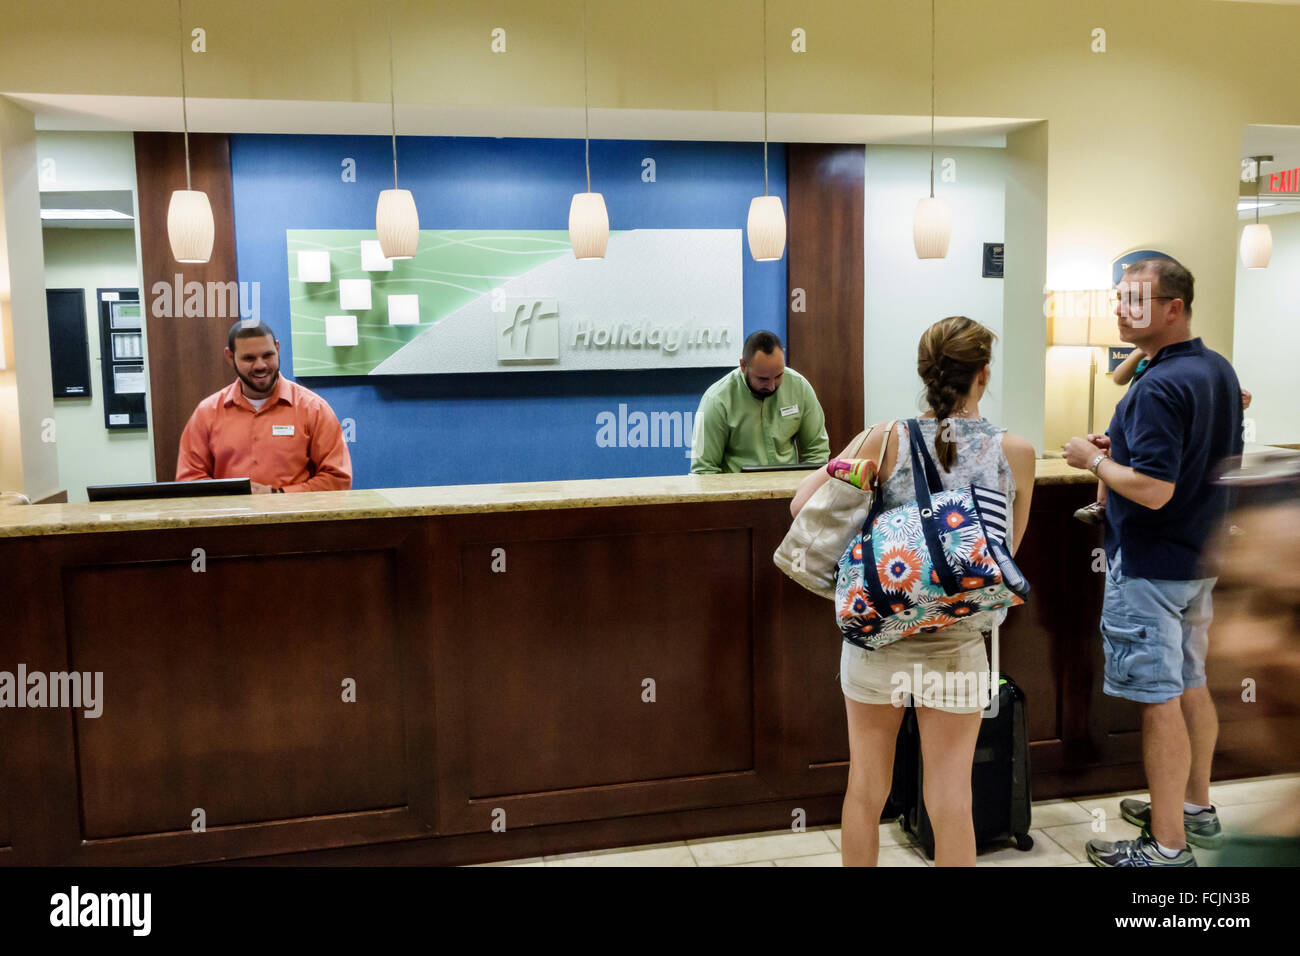 Florida,South,Orlando,Kissimmee,Holiday Inn,hotel hotels lodging inn motel motels,lodging,interior inside,lobby,front desk check in reception reservat Stock Photo